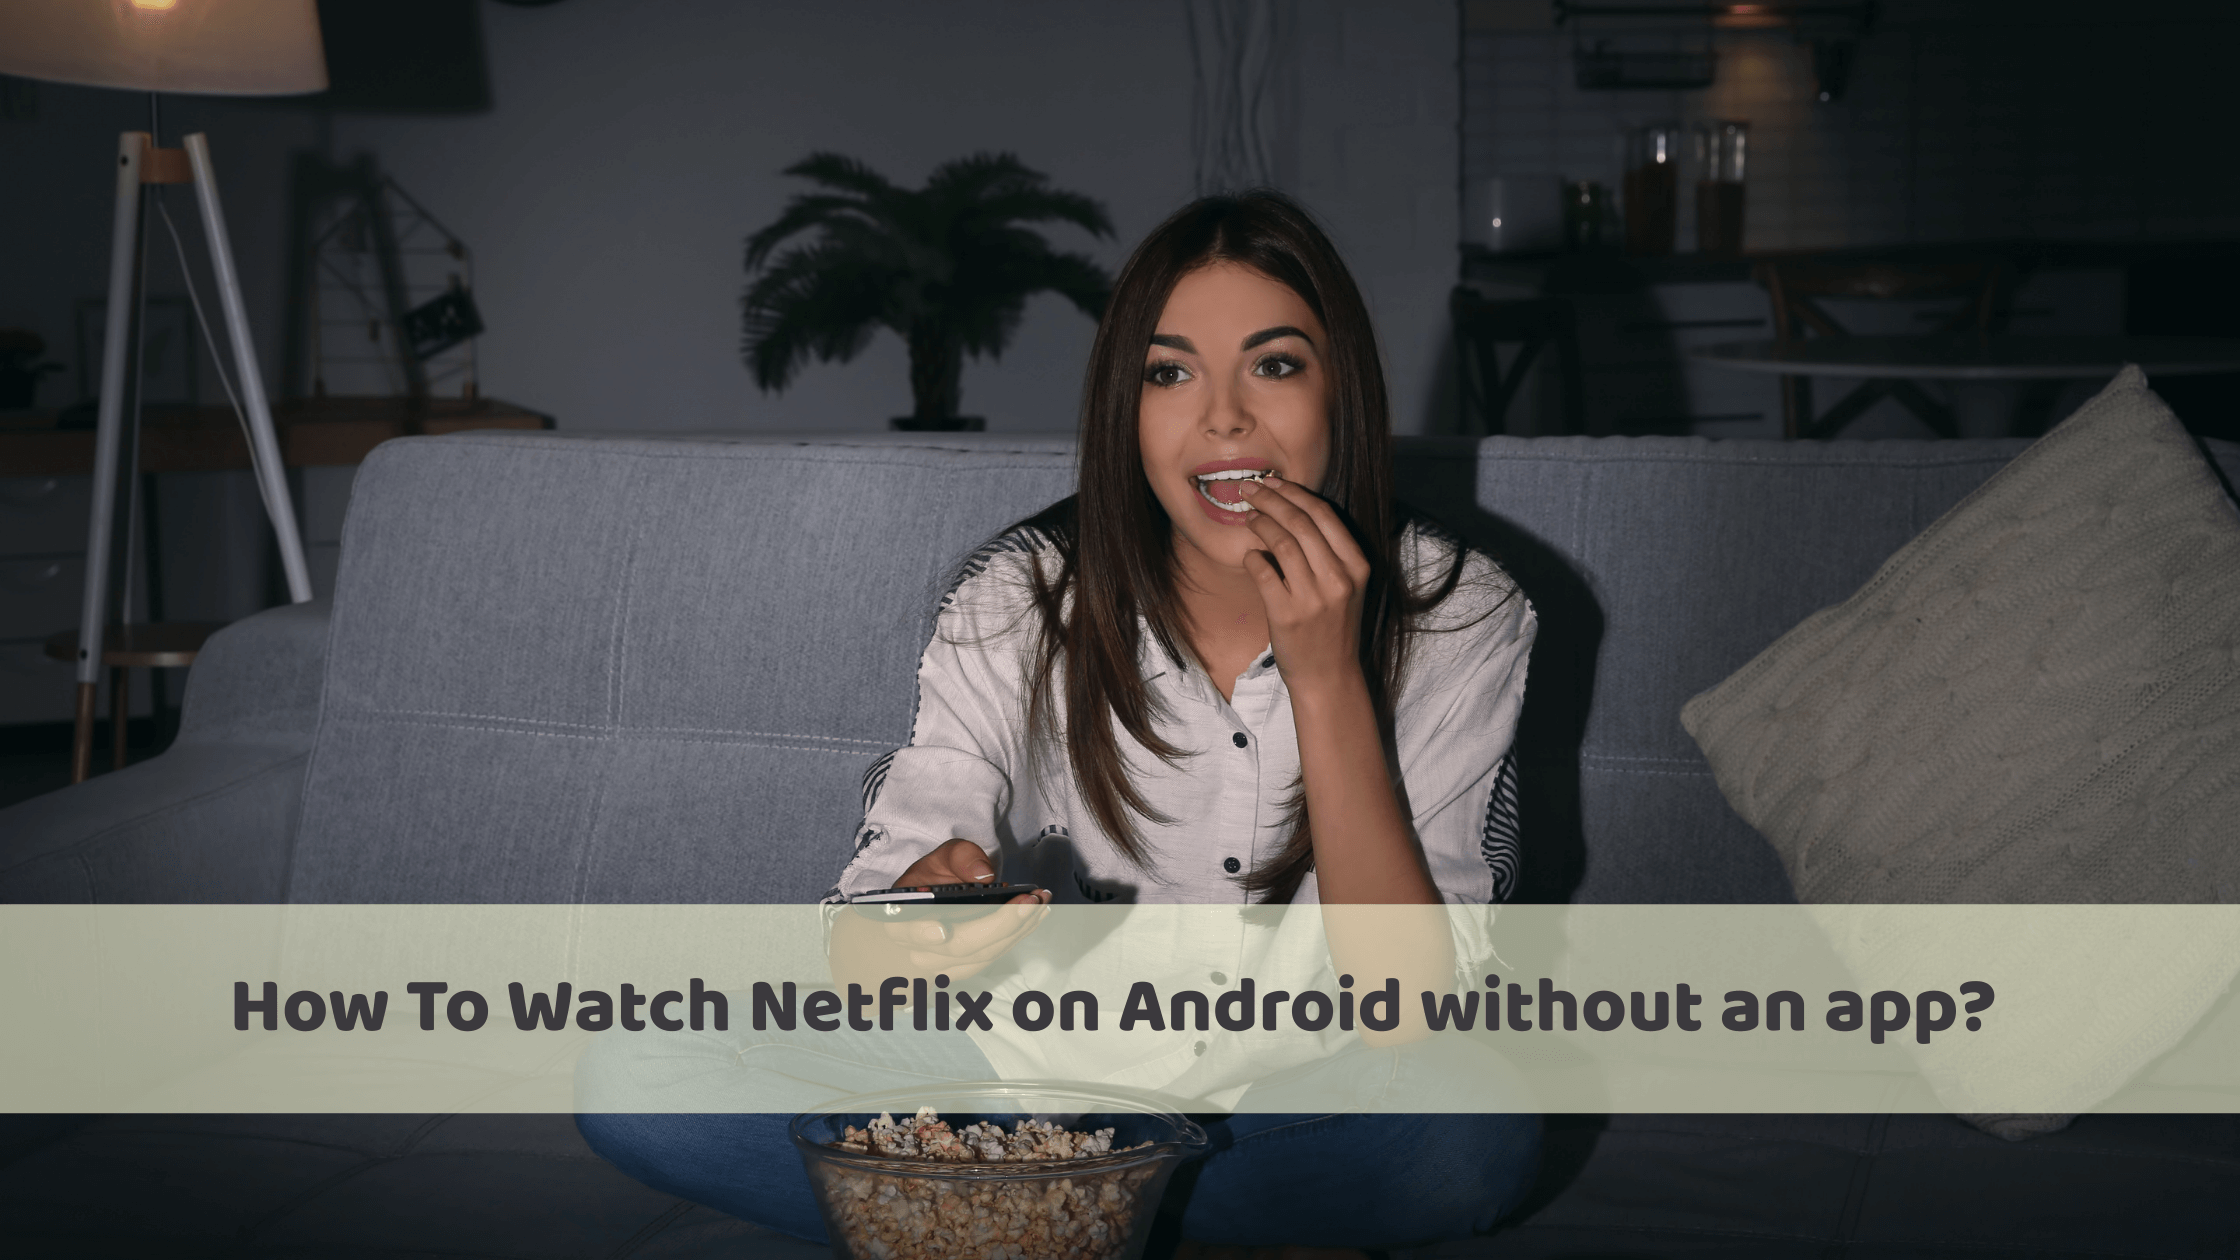 How To Watch Netflix on Android without an app